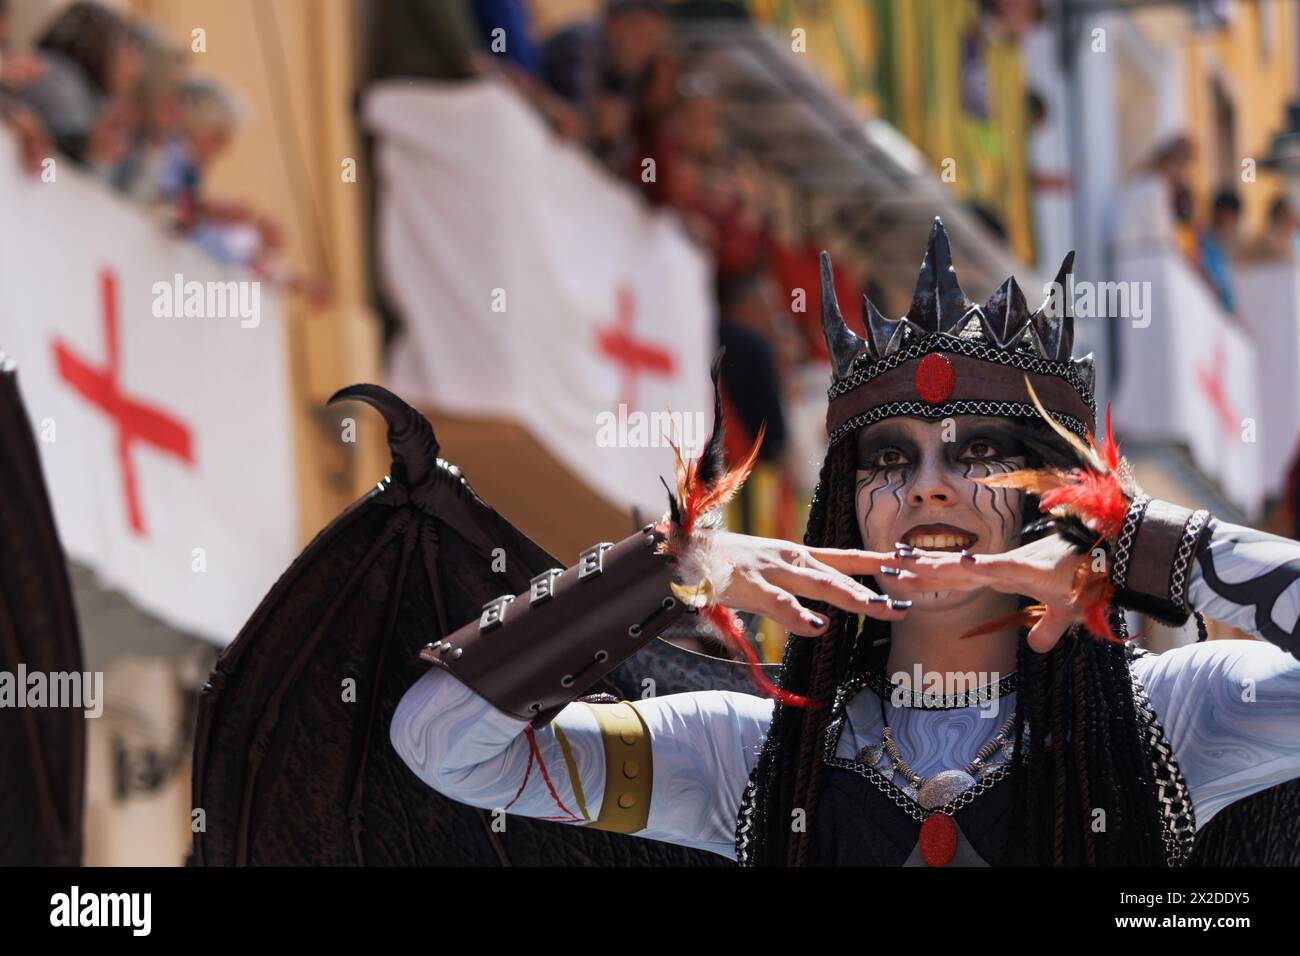 04-20-2024, Alcoy, Spain: Dancer with dragon wings and crown during her performance at the Alcoy Moors and Christians parade. Popular festivals declar Stock Photo